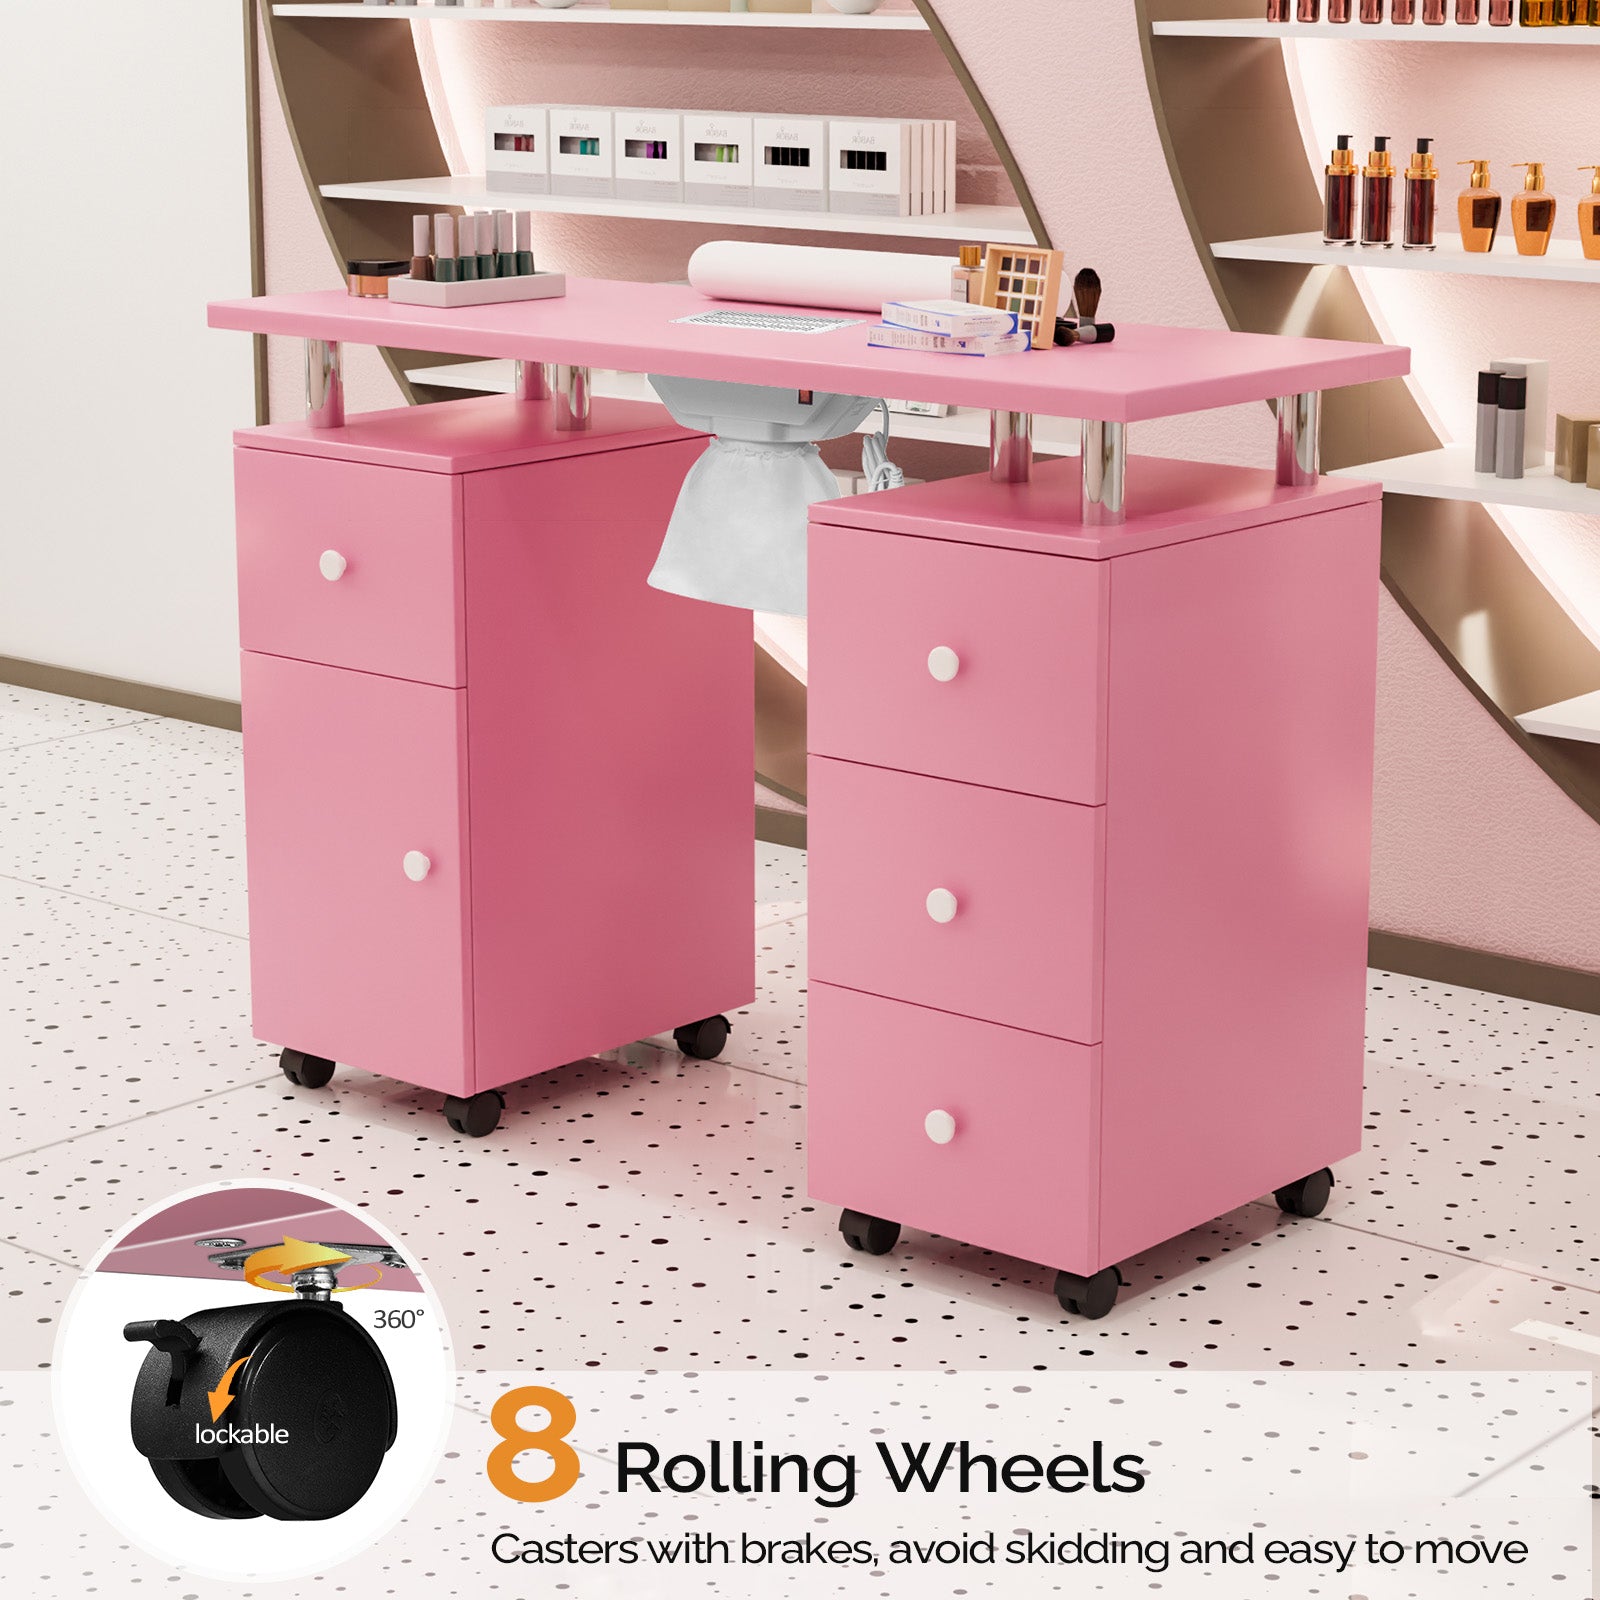 Omysalon Nail Manicure Table w/Electric Dust Collector & Wrist Rest & 2 Open Spaces 1 Side Cabinet 4 Drawers